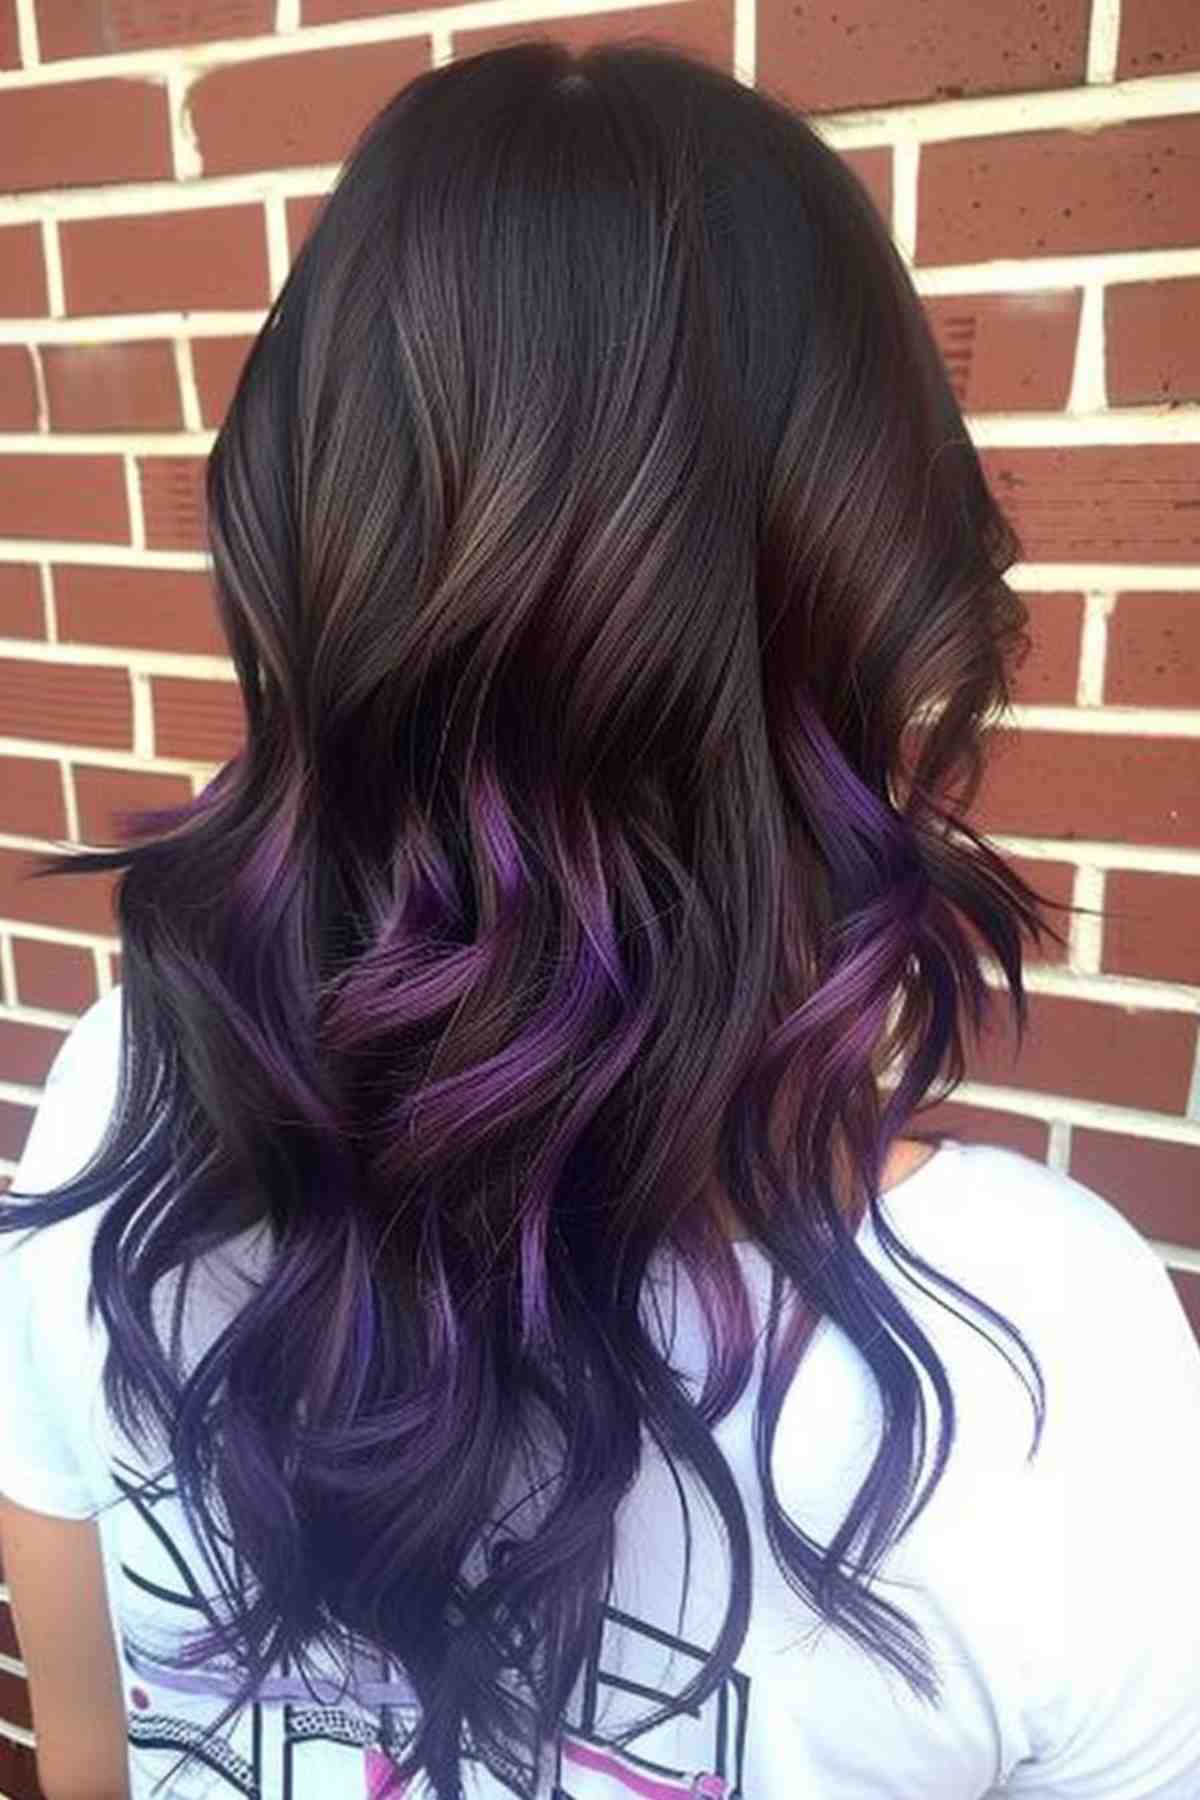 Medium-length wavy hair transitioning from dark brown roots to rich purple ombre ends.